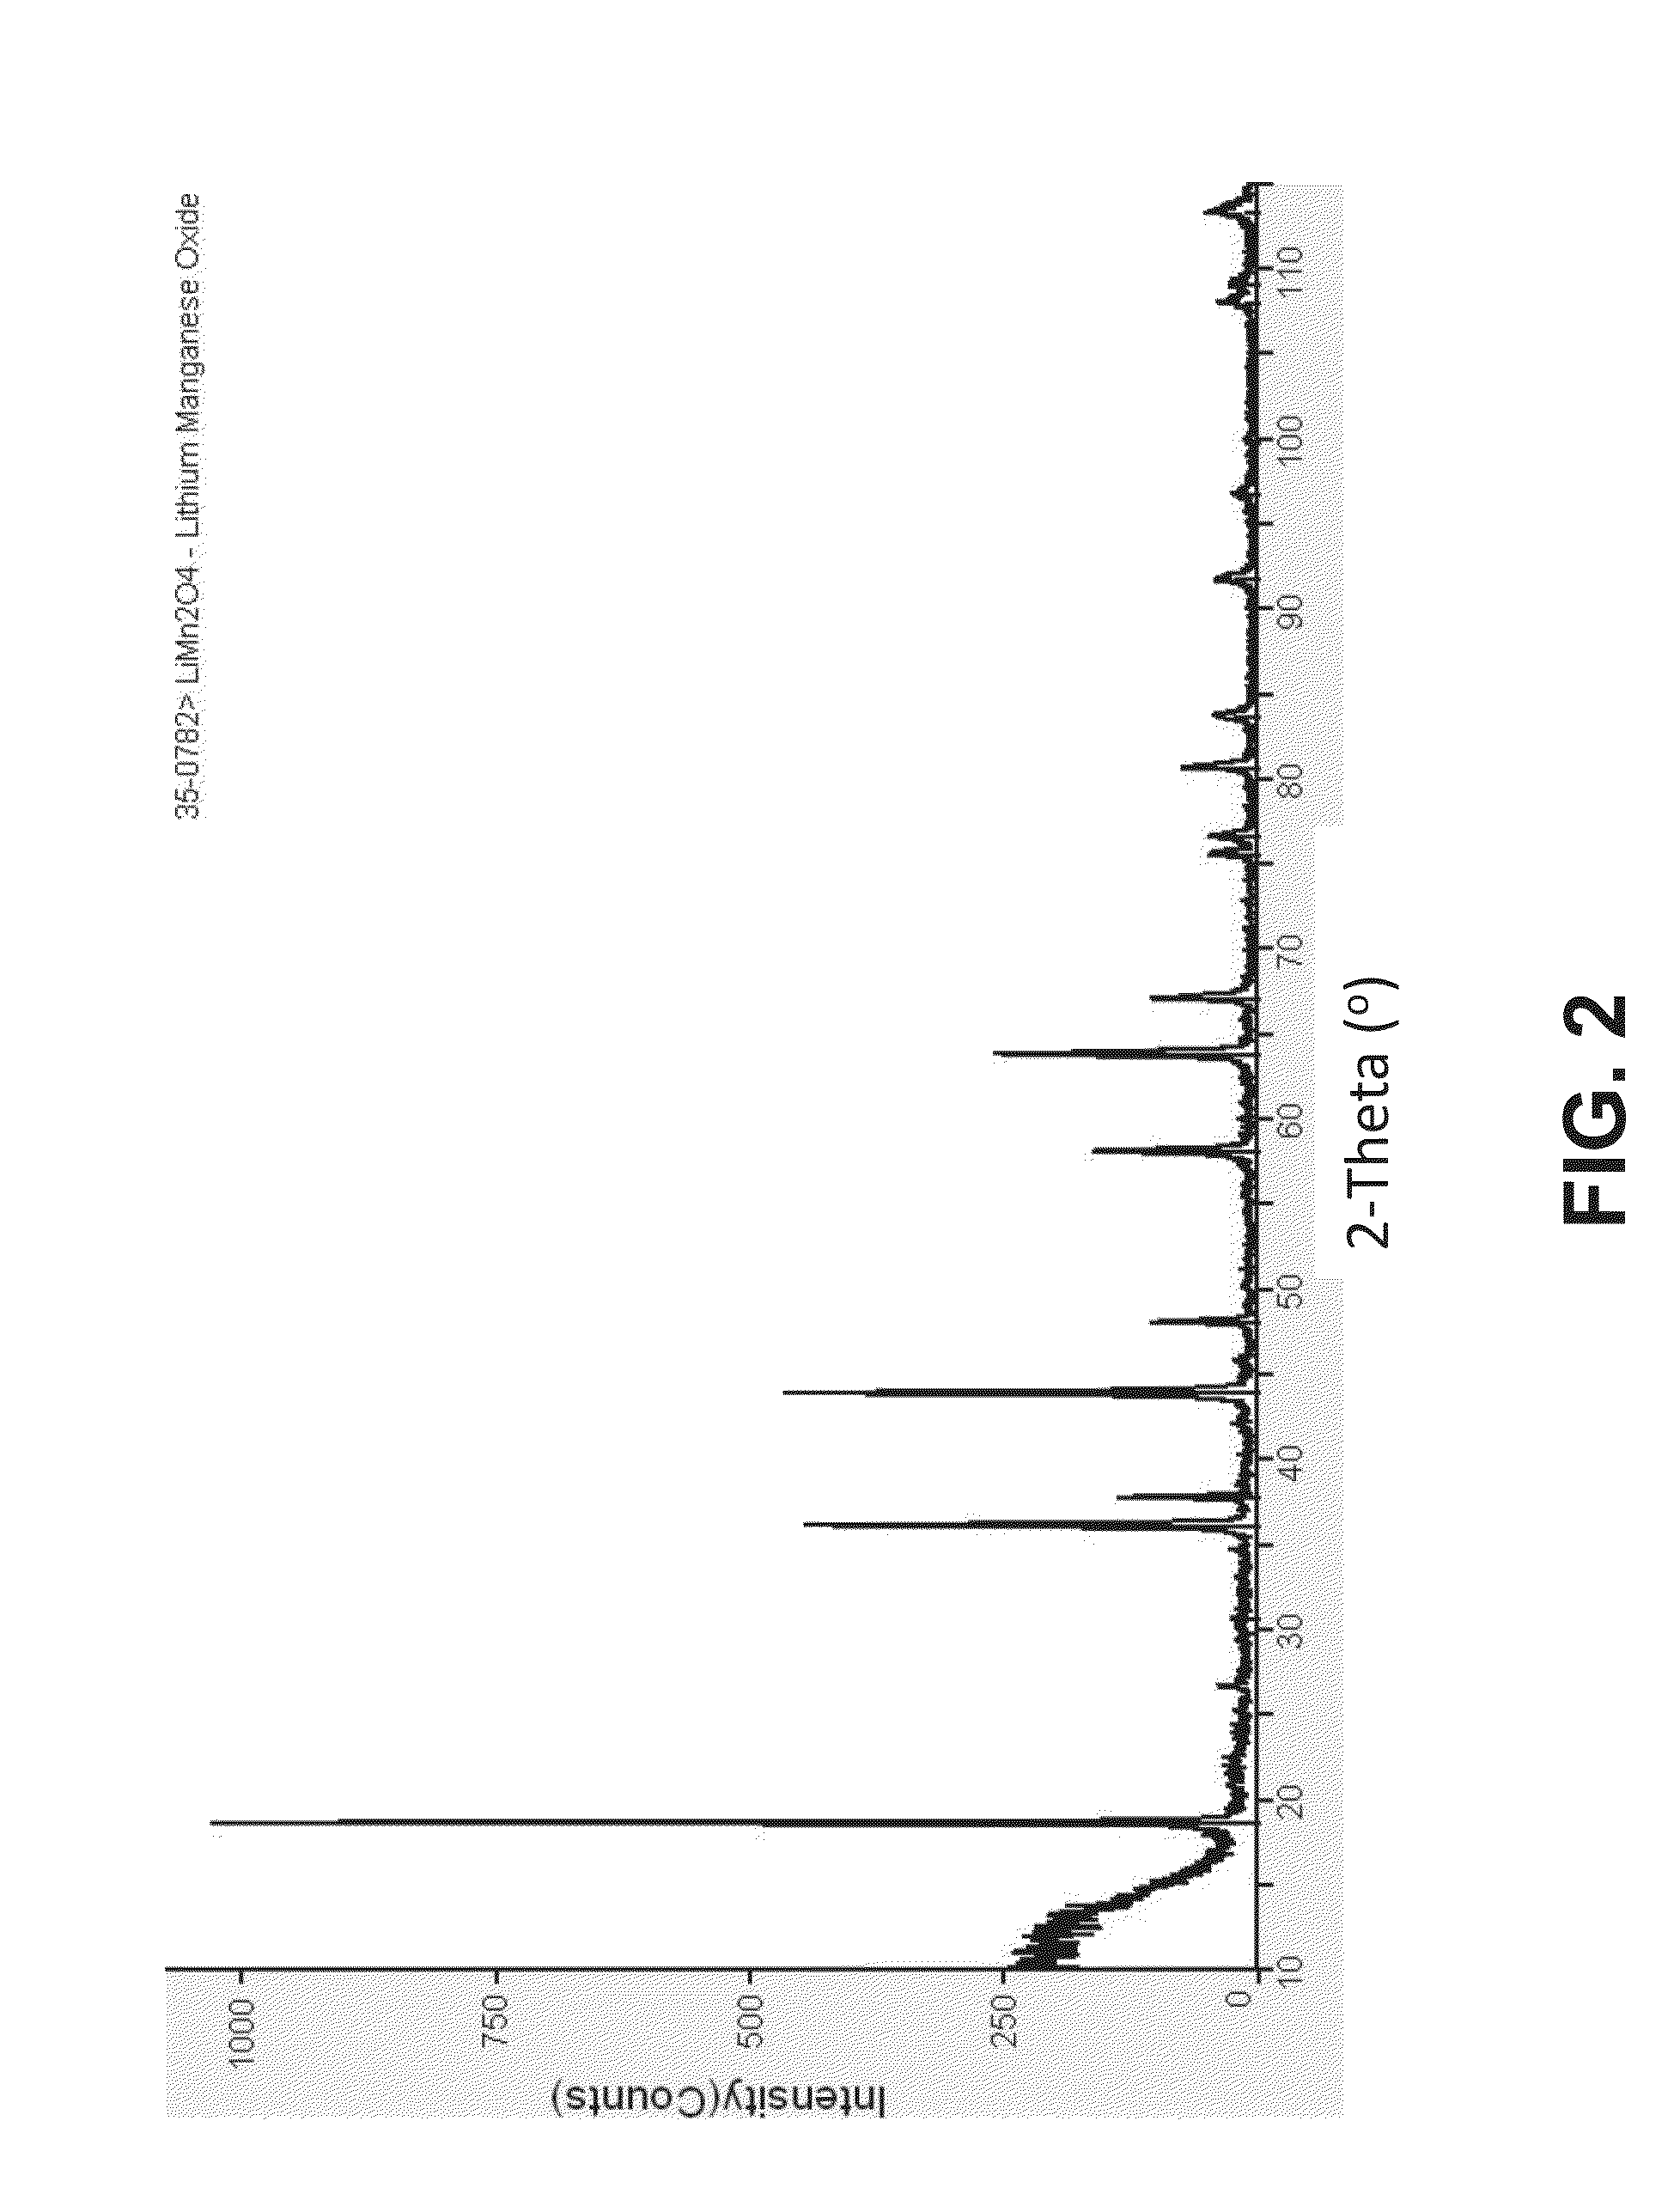 Method and electrochemical device for low environmental impact lithium recovery from aqueous solutions